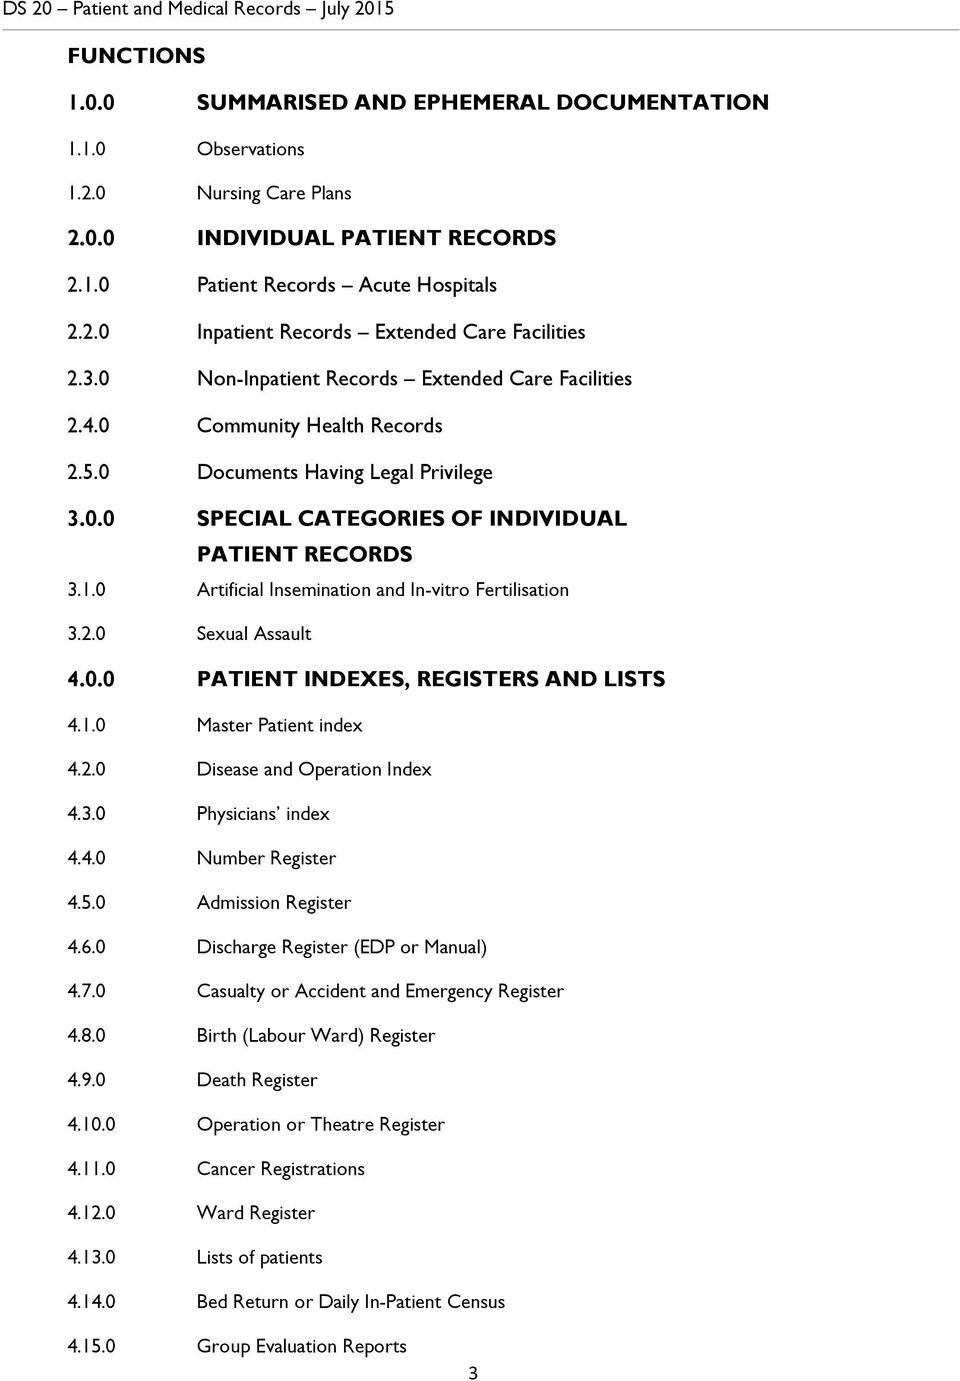 0 Artificial Insemination and In-vitro Fertilisation 3.2.0 Sexual Assault 4.0.0 PATIENT INDEXES, REGISTERS AND LISTS 4.1.0 Master Patient index 4.2.0 Disease and Operation Index 4.3.0 Physicians index 4.